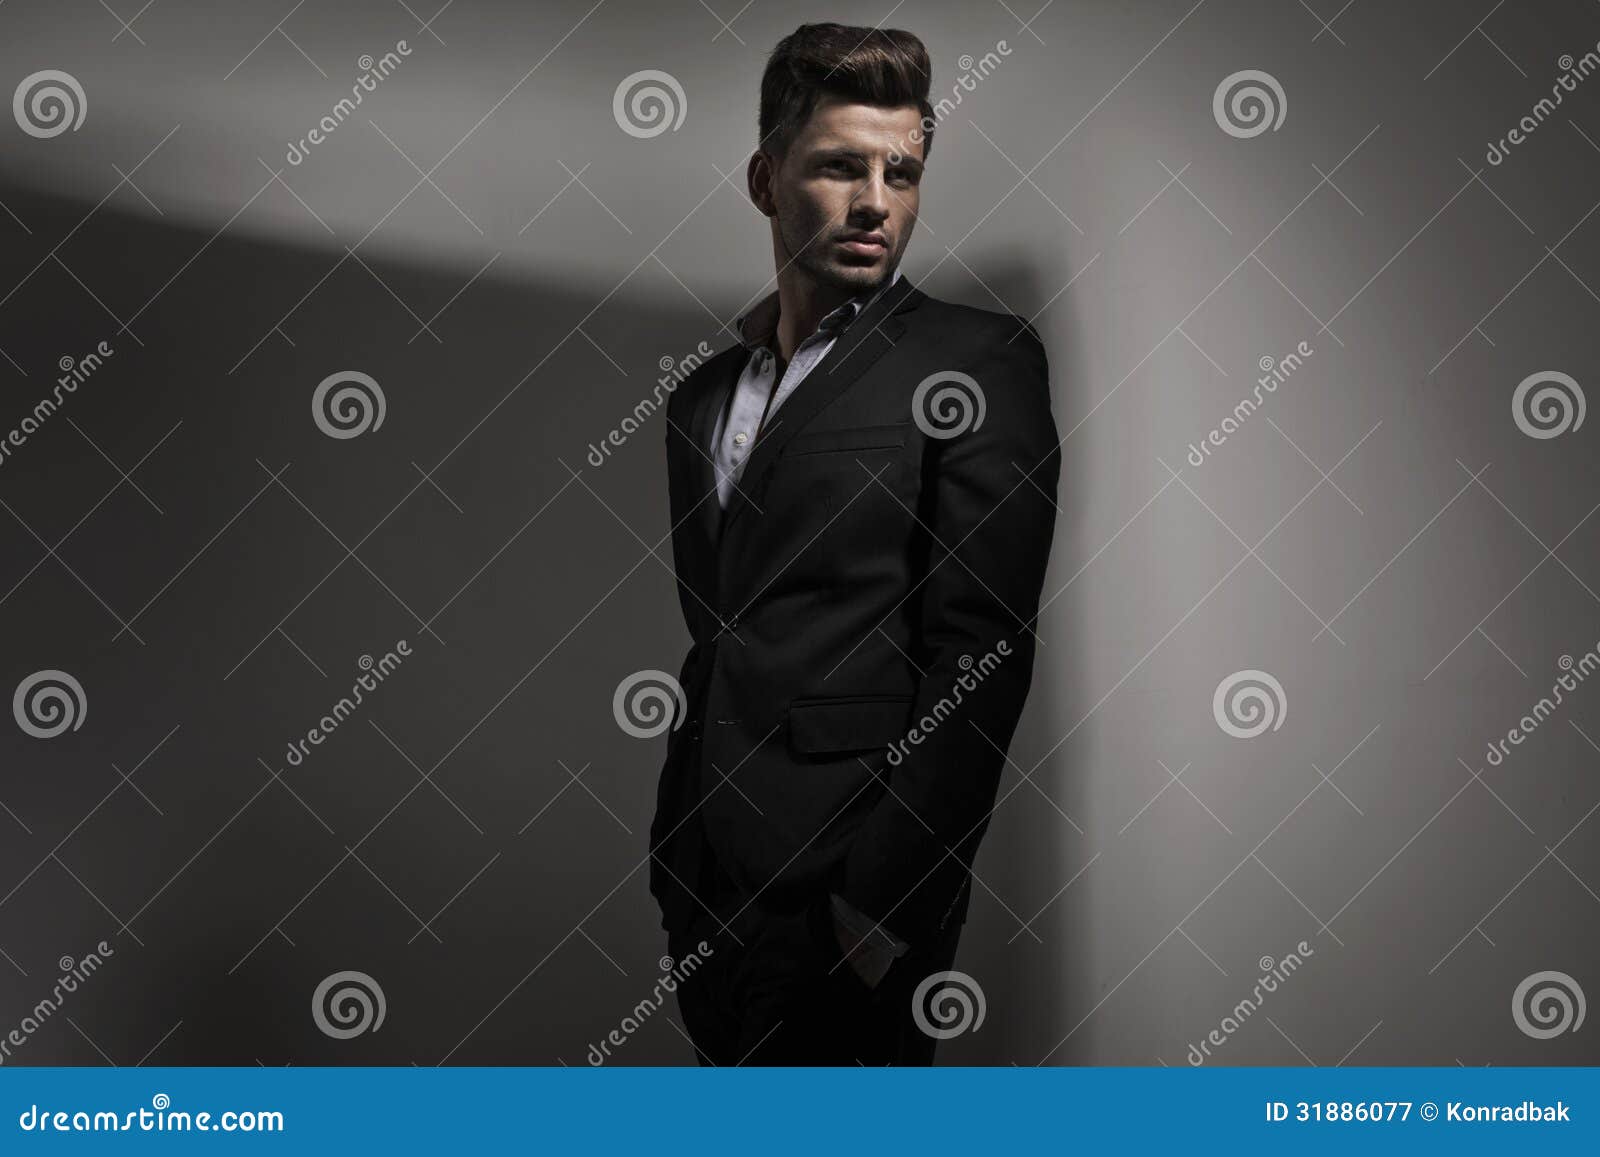 fashion style photo of young guy